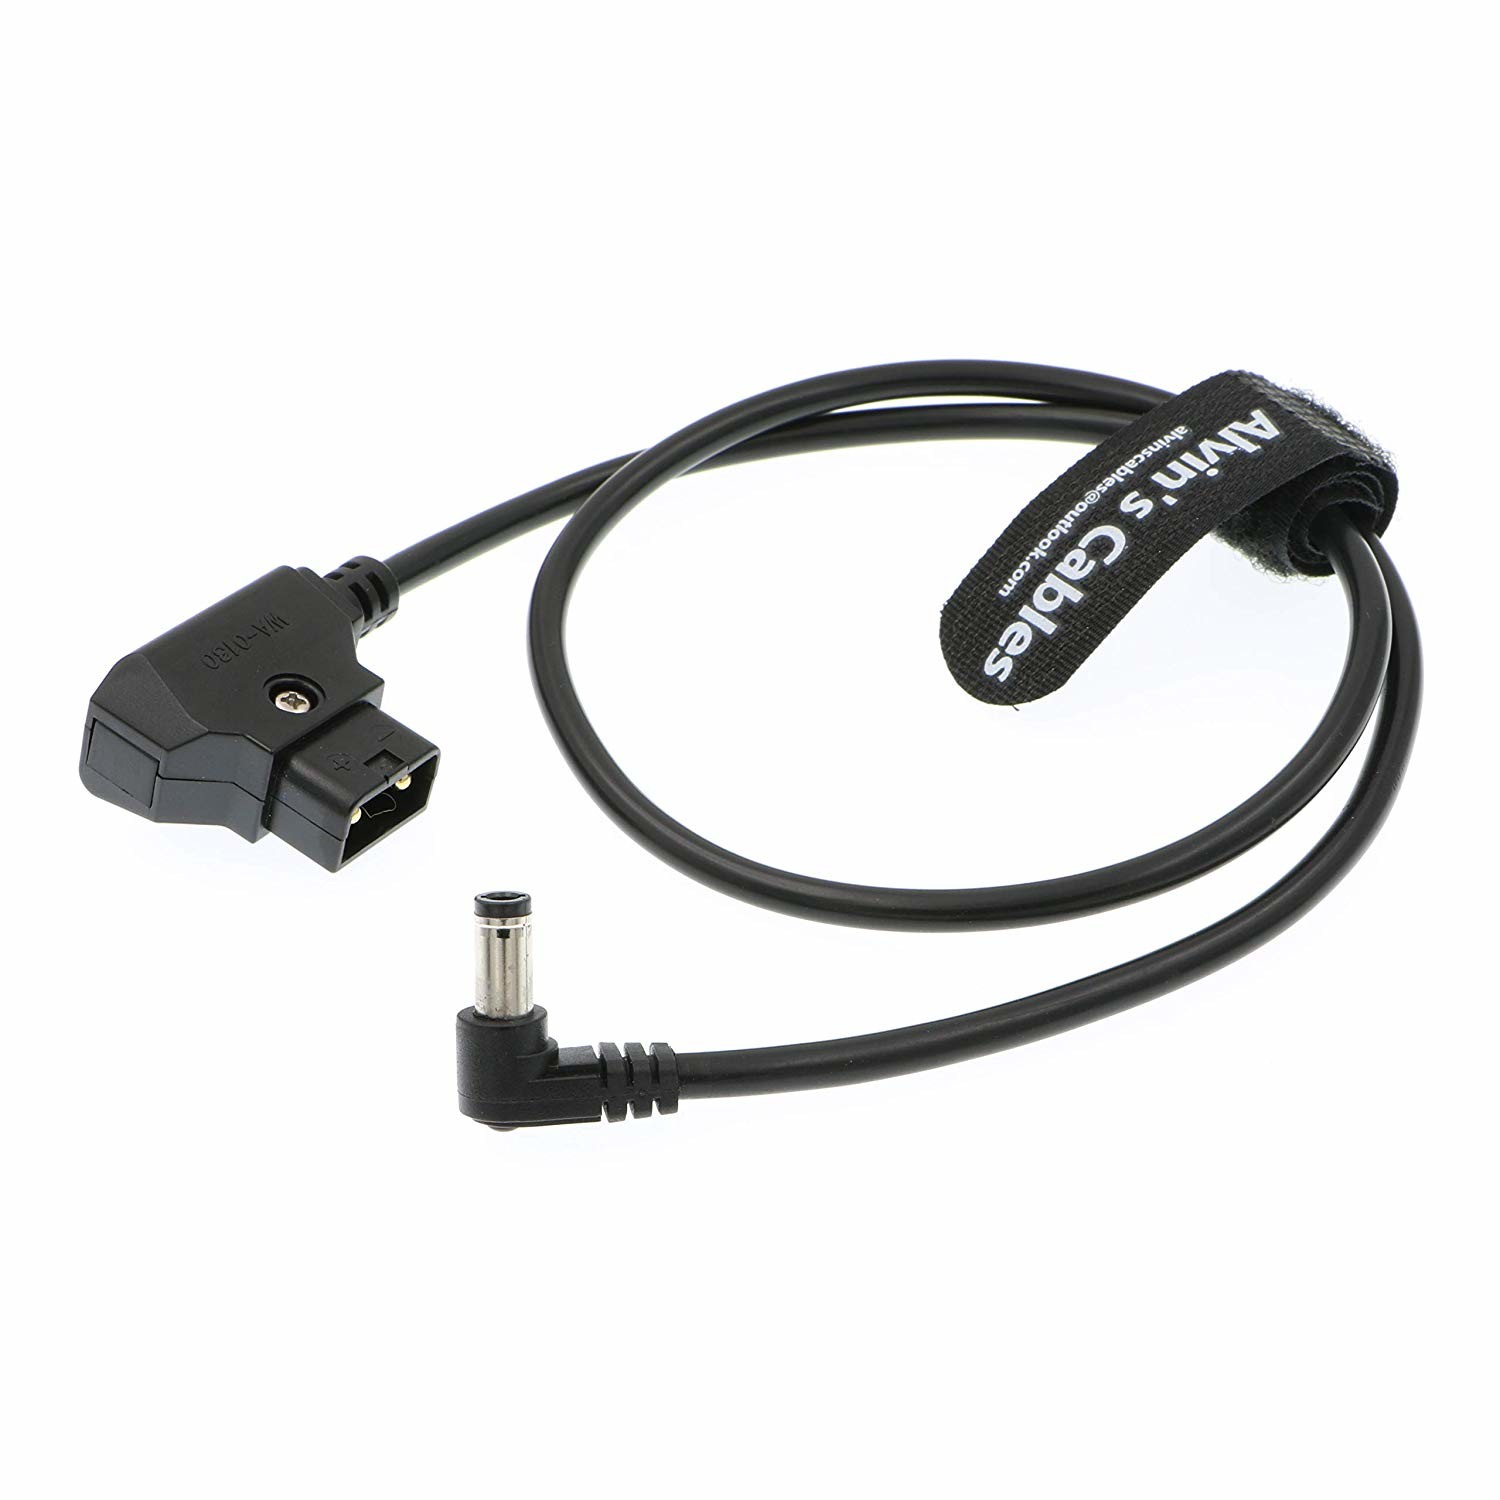 China Anton Bauer Power Tap D-Tap to 2.1 DC Right Angle 12v Cable for KiPRO LCD Monitors wholesale